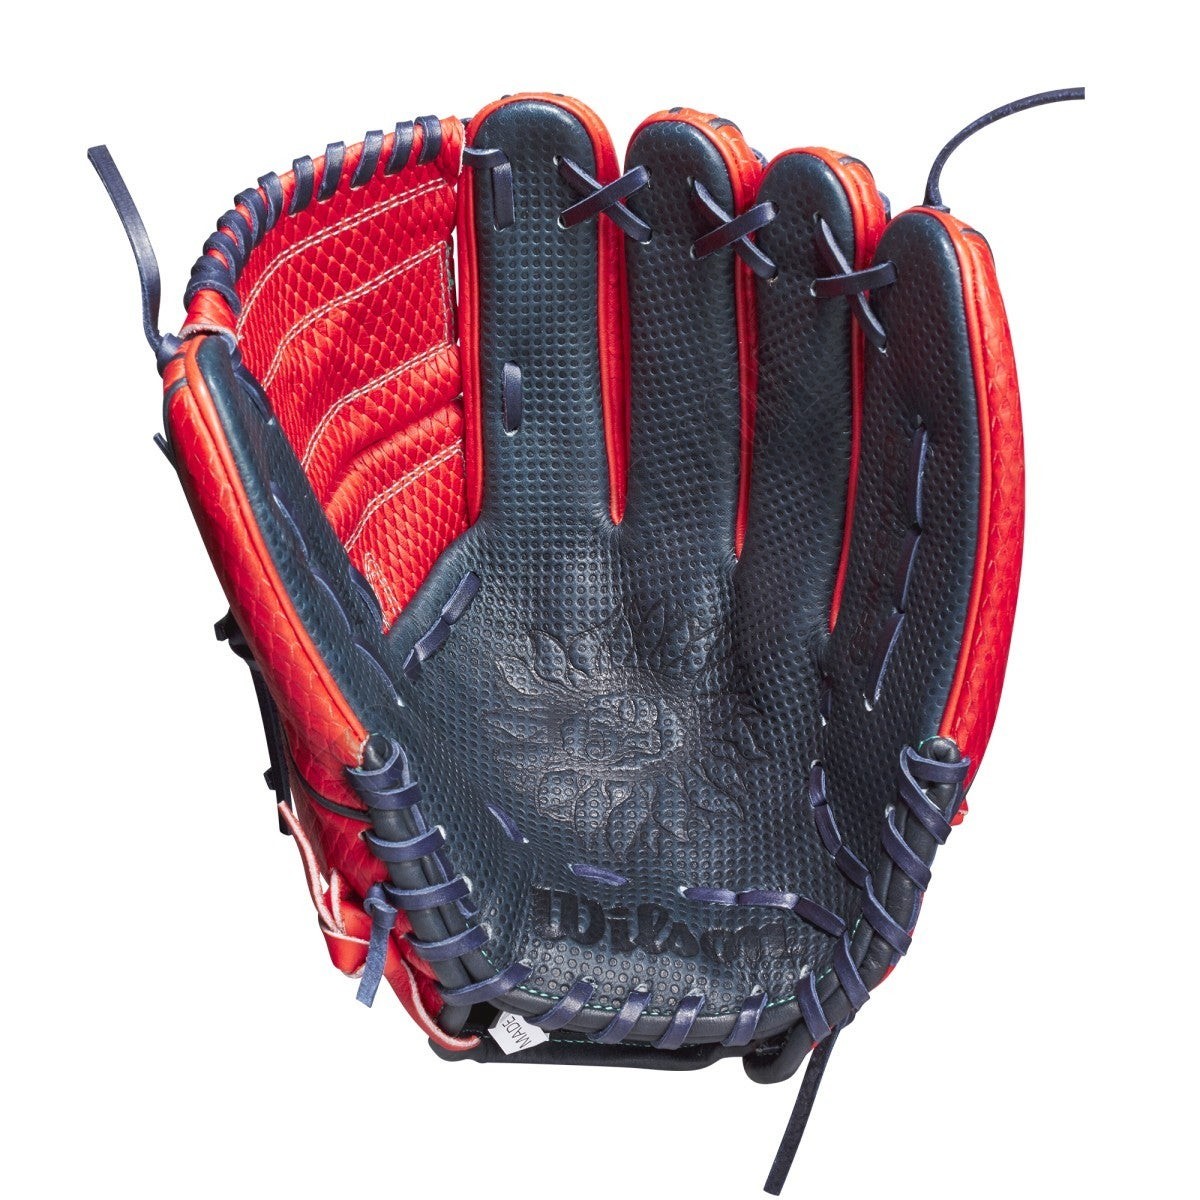 2021 A2000 B2 12" Mike Clevinger Game Model Pitcher's Baseball Glove ● Wilson Promotions - -2